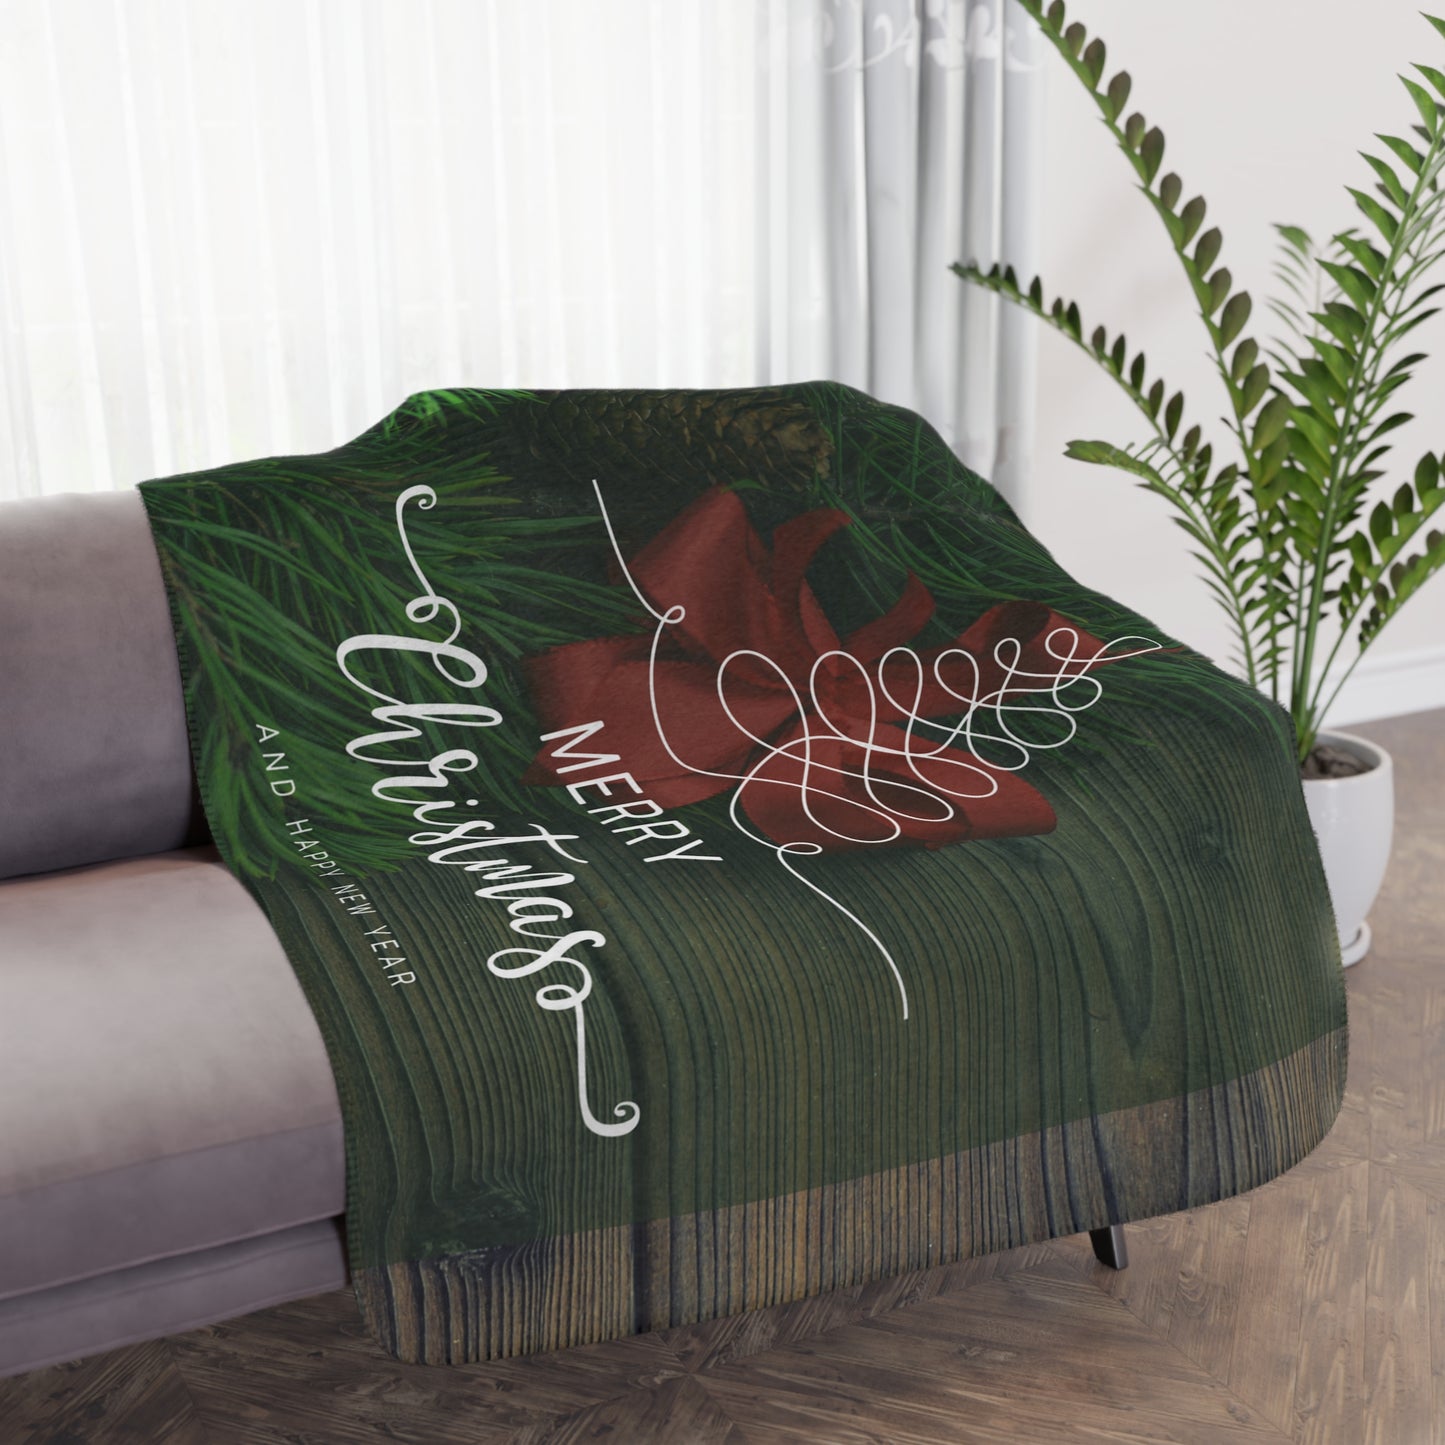 Merry Christmas with Tree Printed Tan Sherpa Blanket